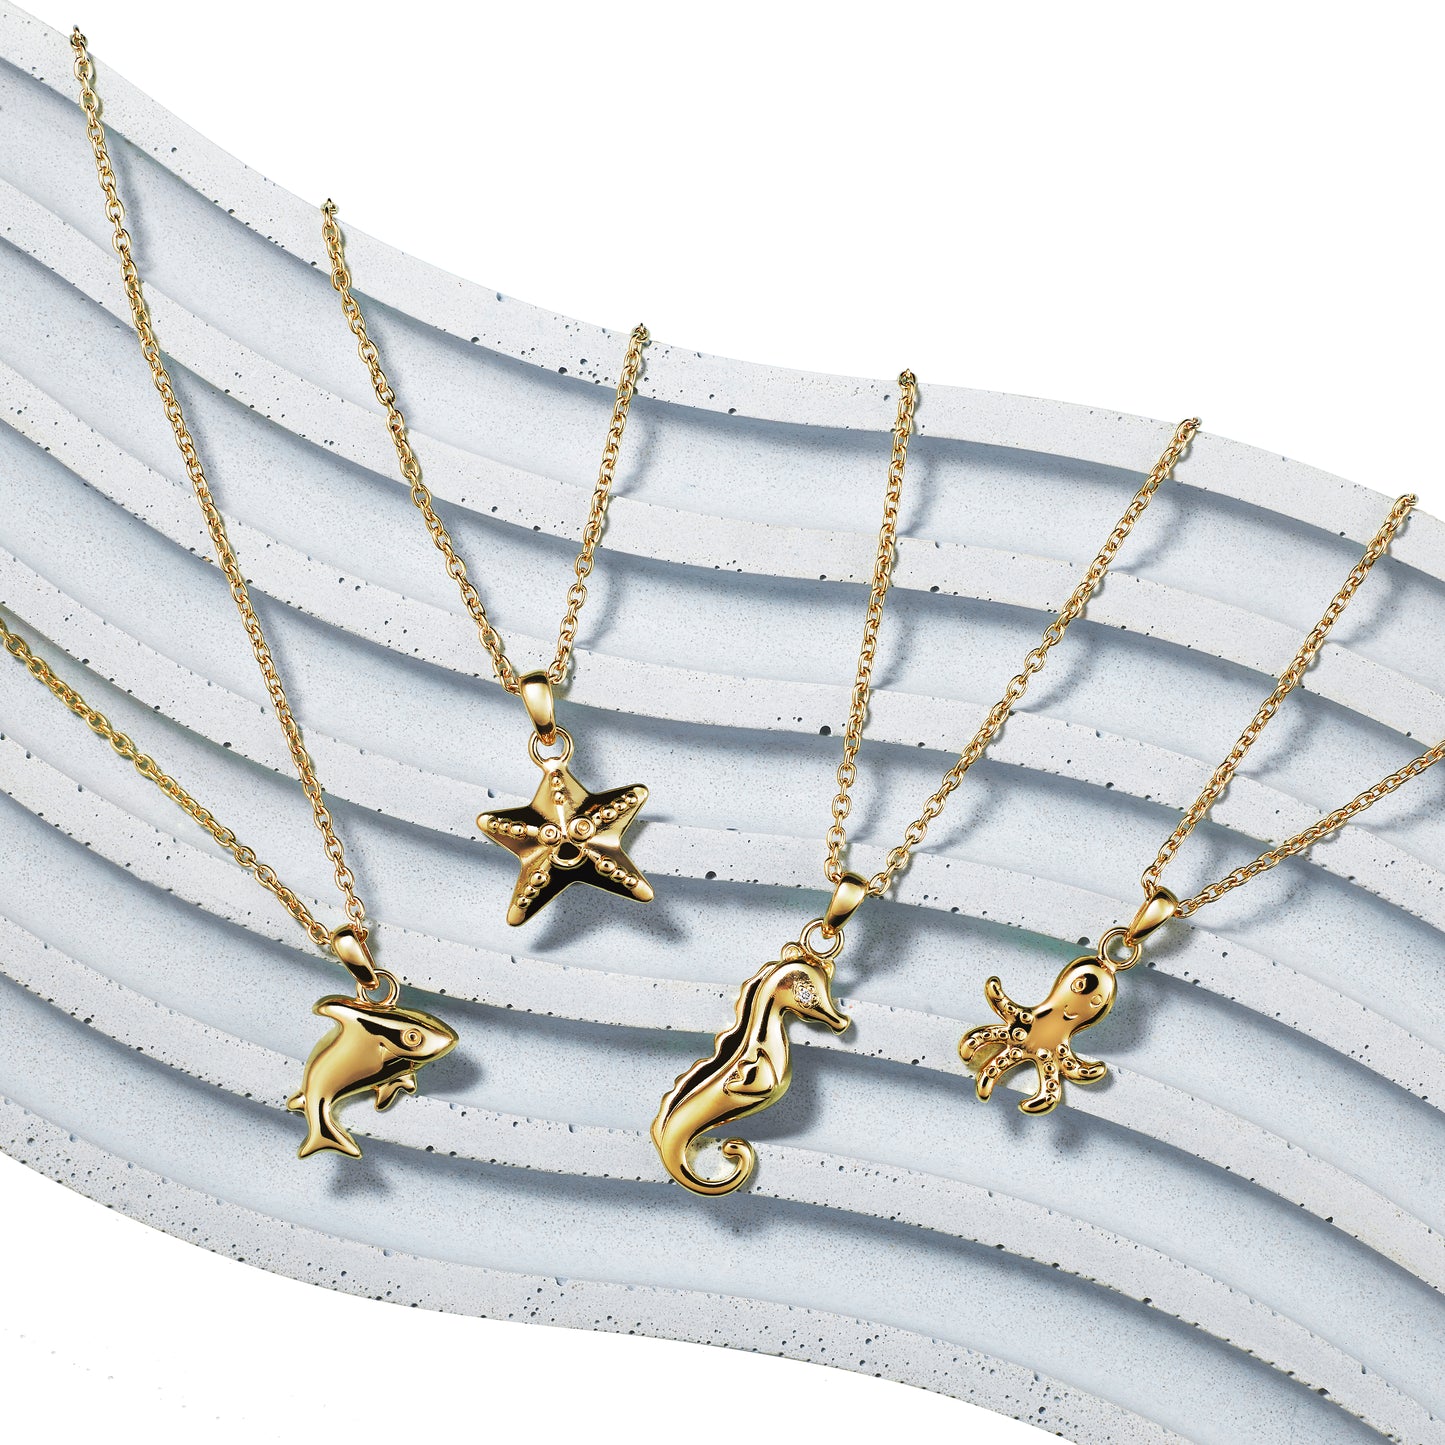 Under the Sea collection of gold children's necklaces including shark, starfish, seahorse and octopus, all on Extendable Chain Necklaces